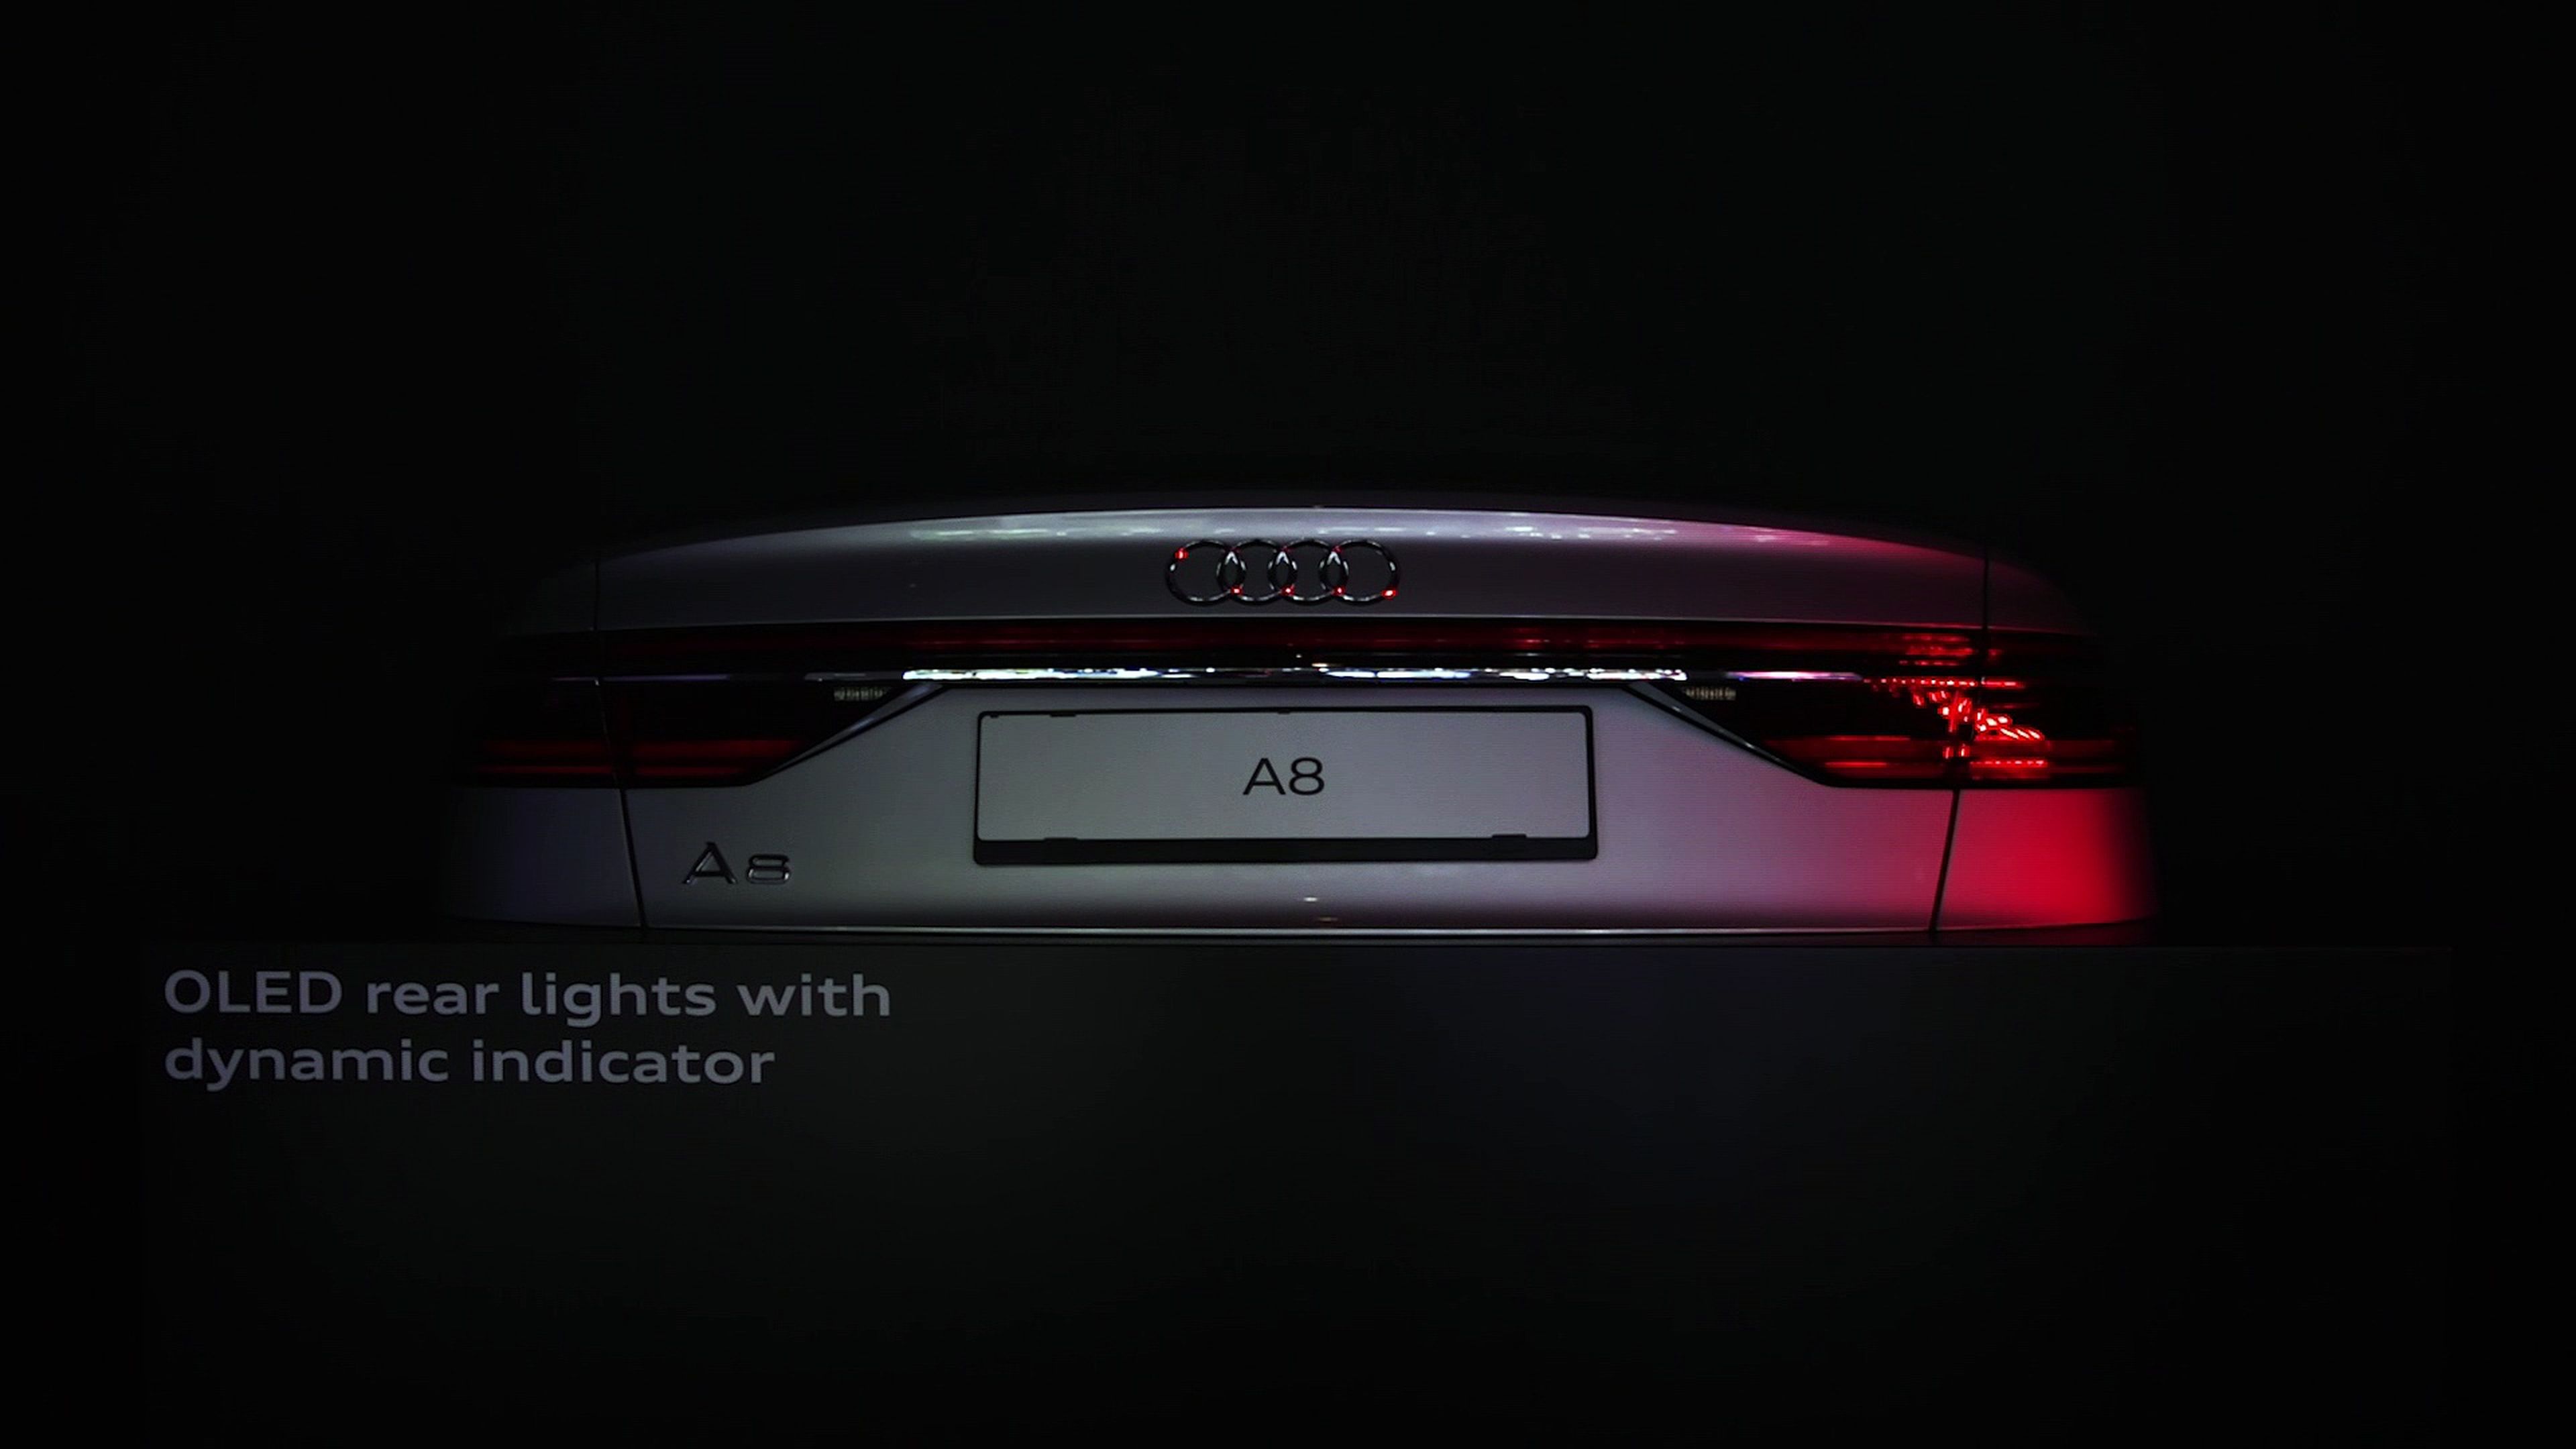 Luces traseras OLED del Audi A8